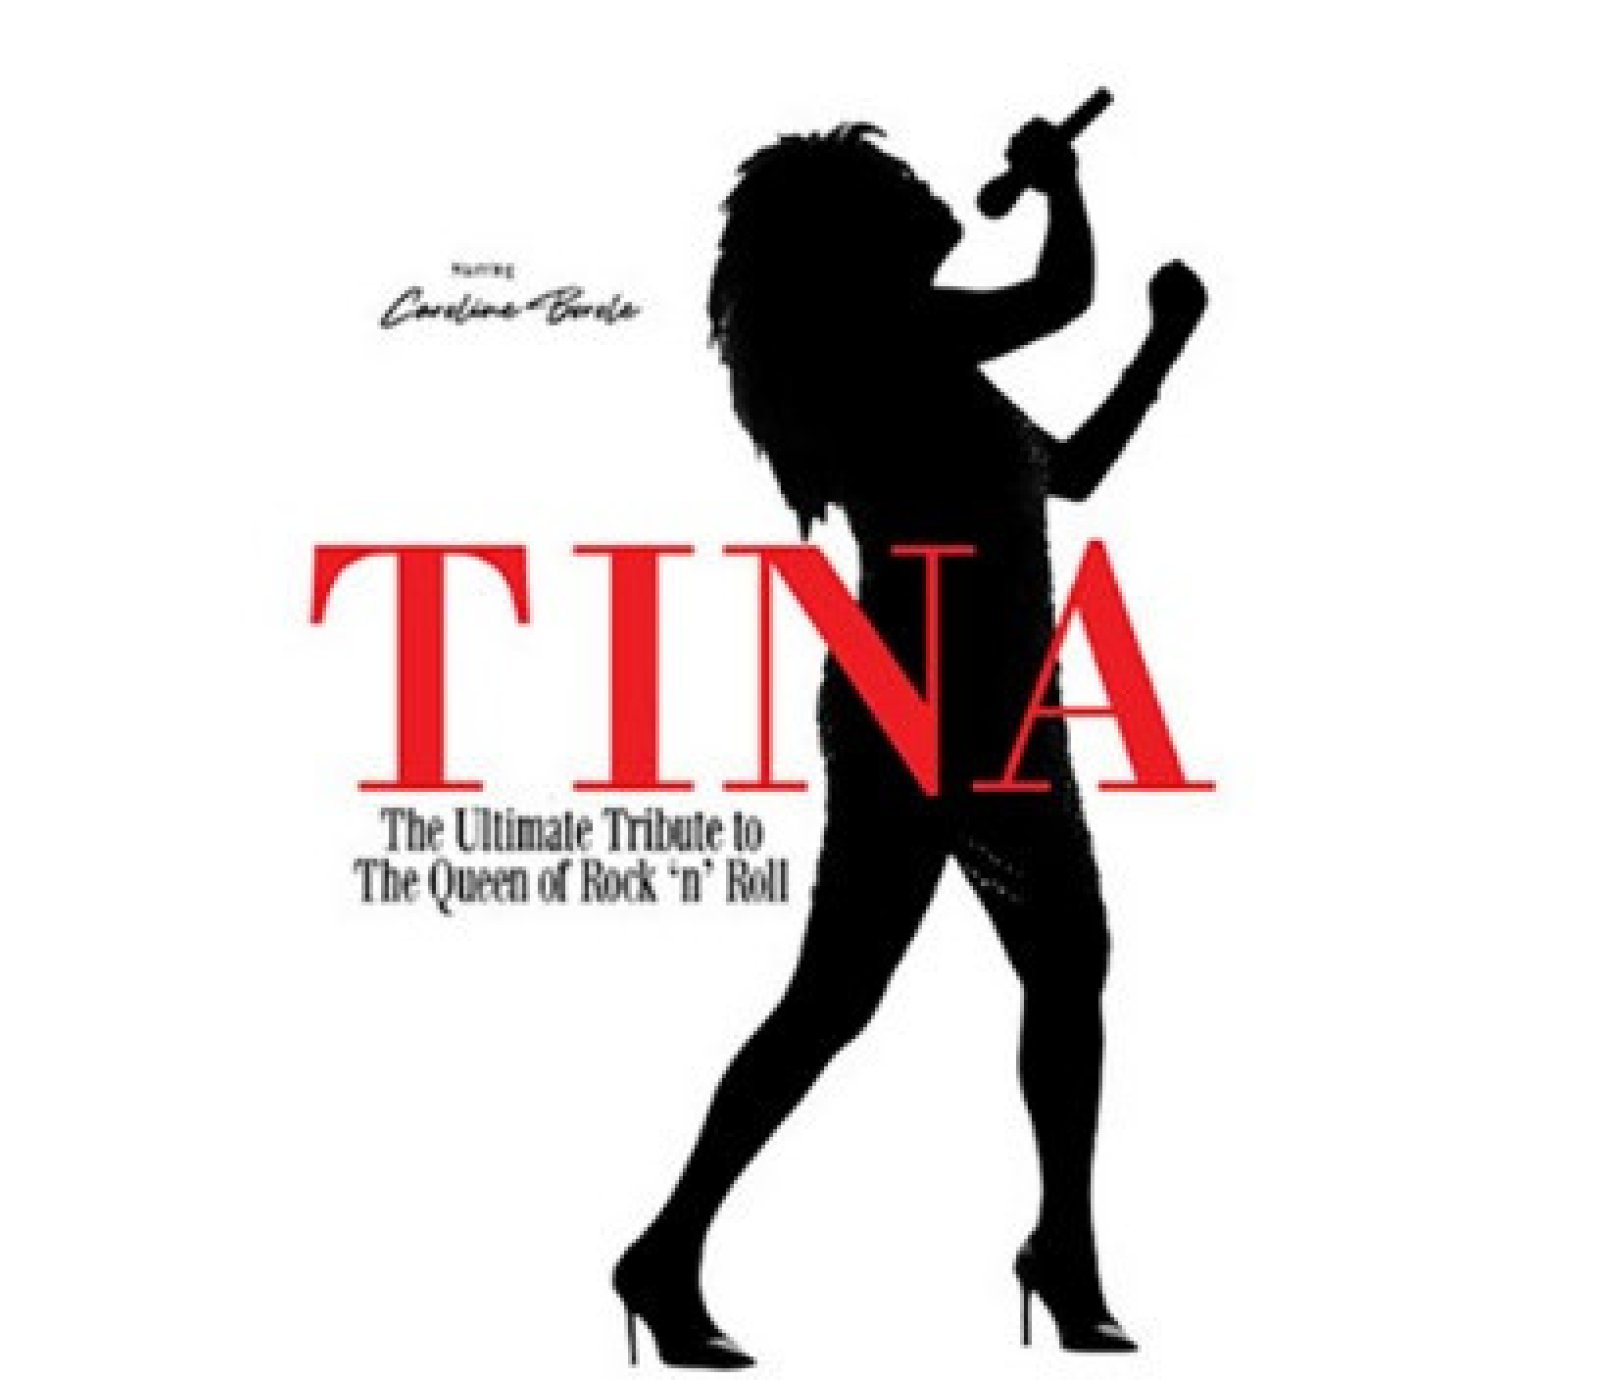 TINA The Ultimate Tribute to the Queen of Rock ‘n’ Roll!